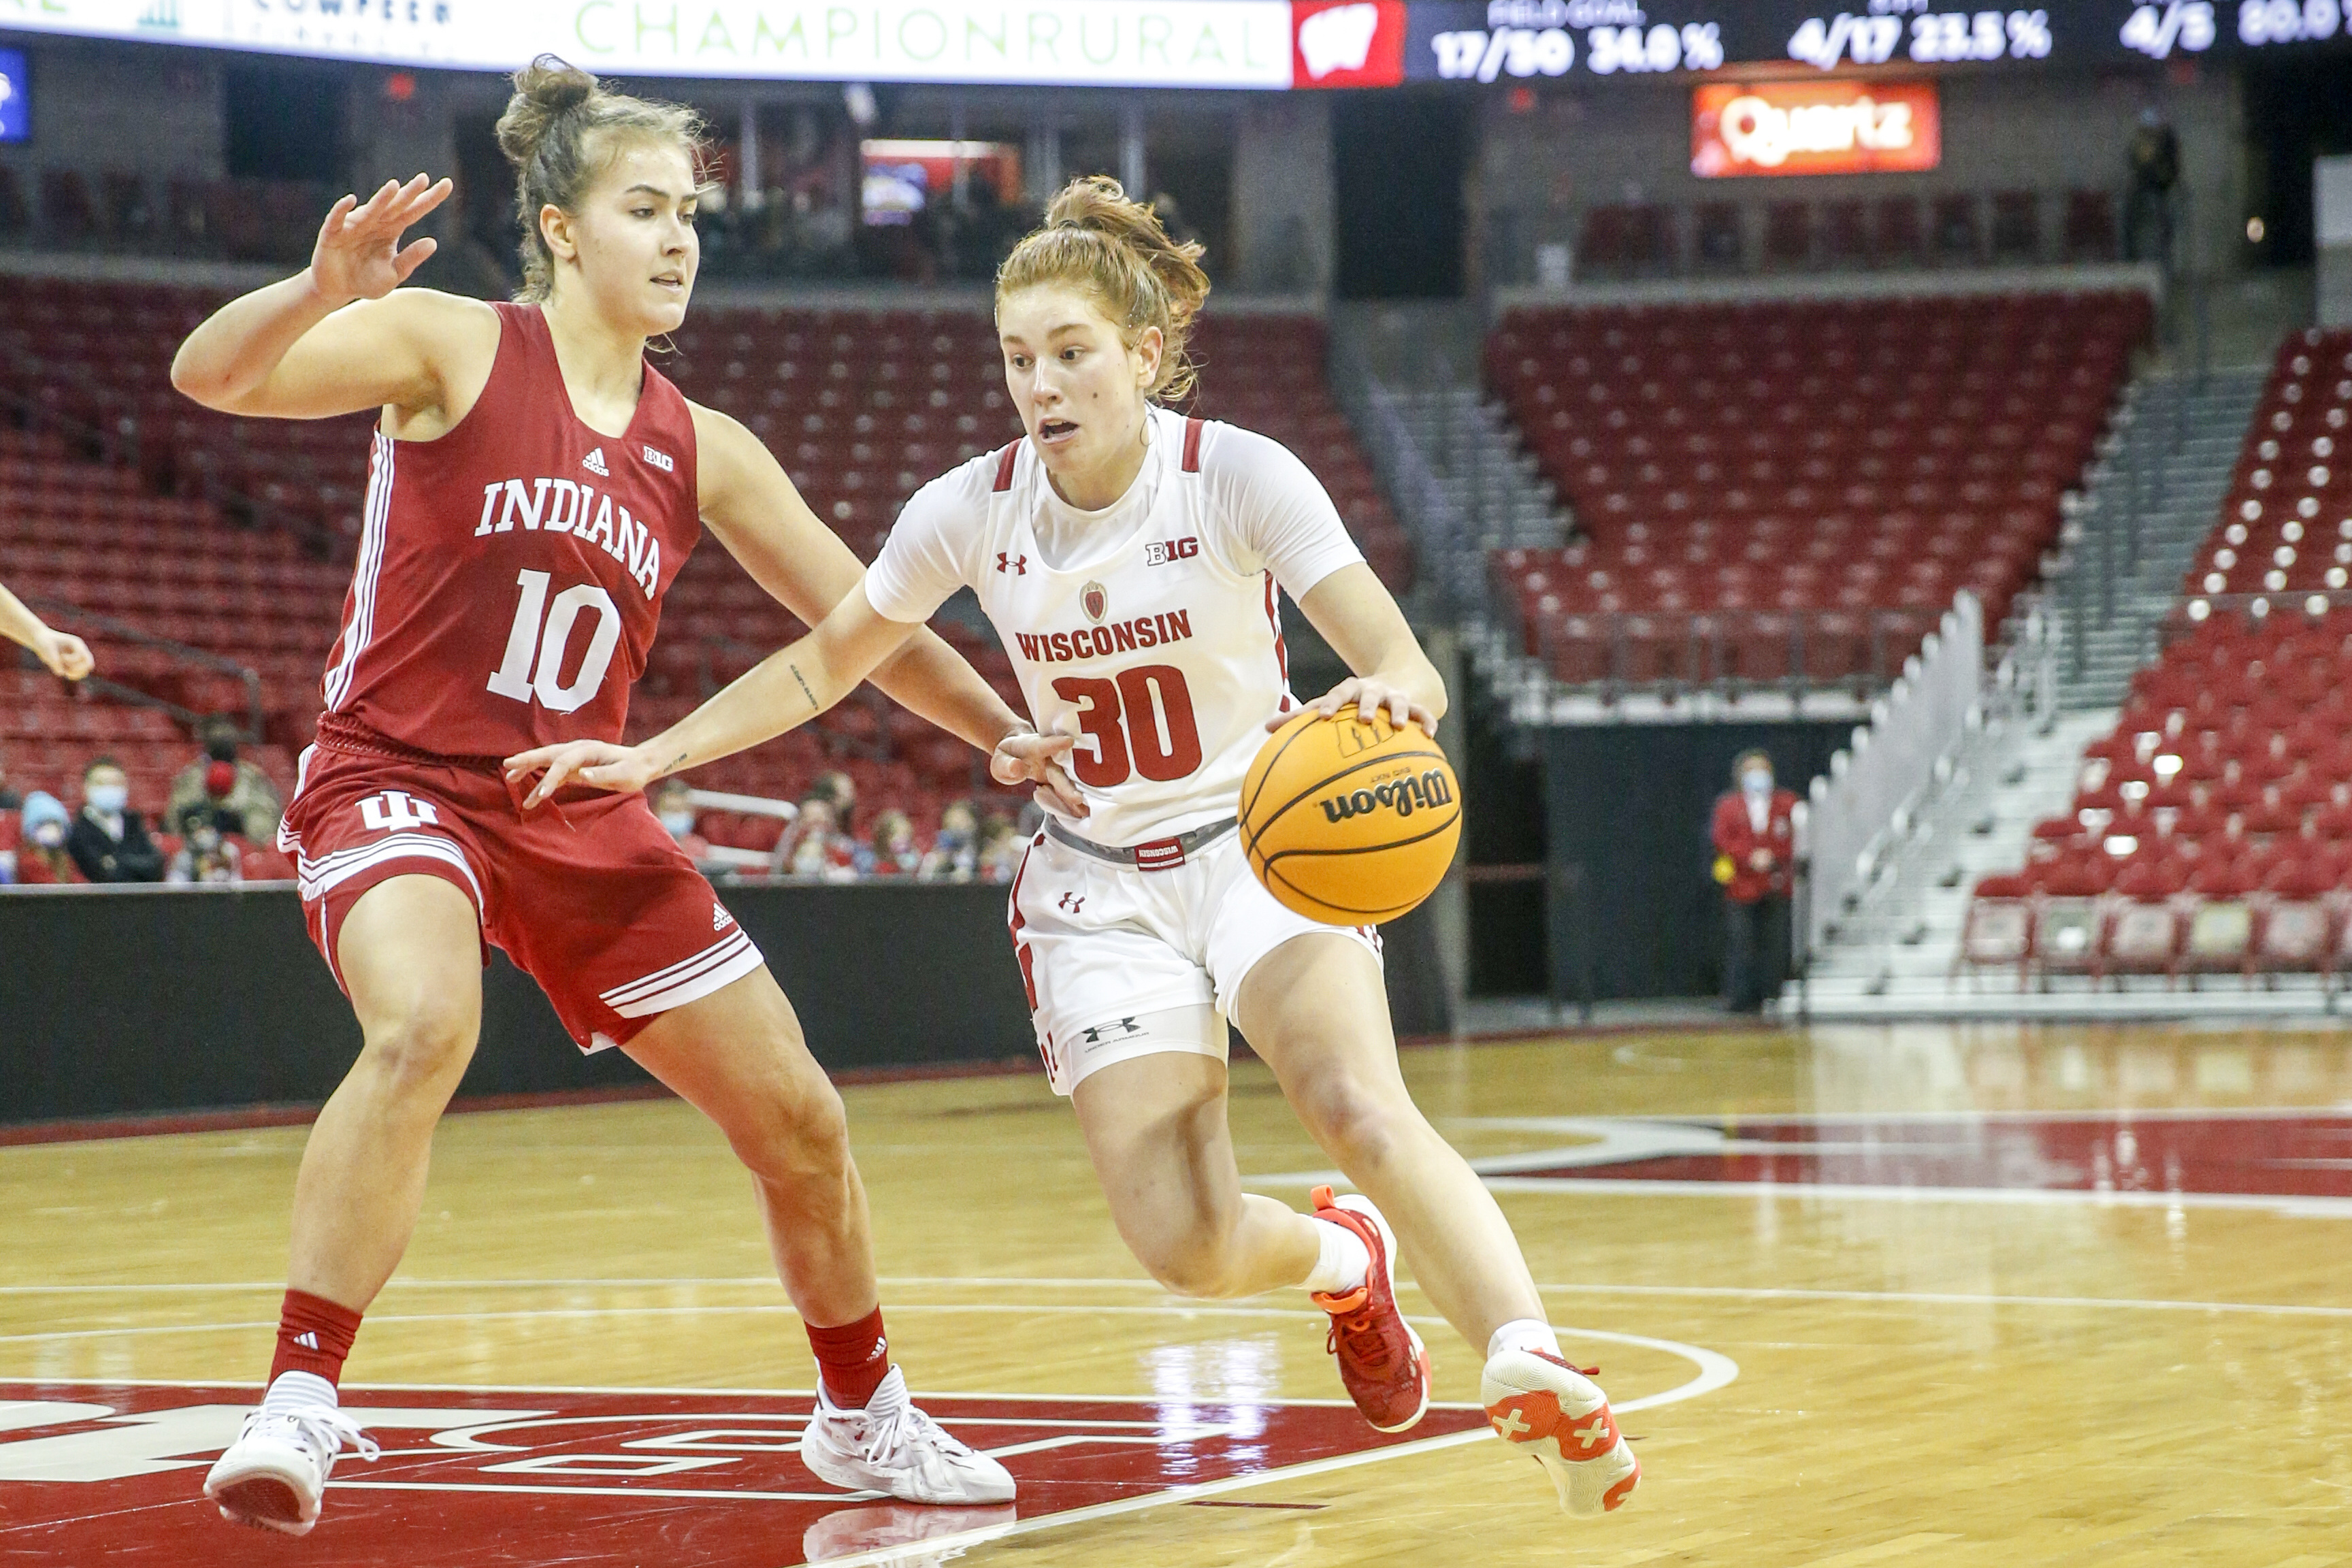 COLLEGE BASKETBALL: JAN 05 Womens - Indiana at Wisconsin